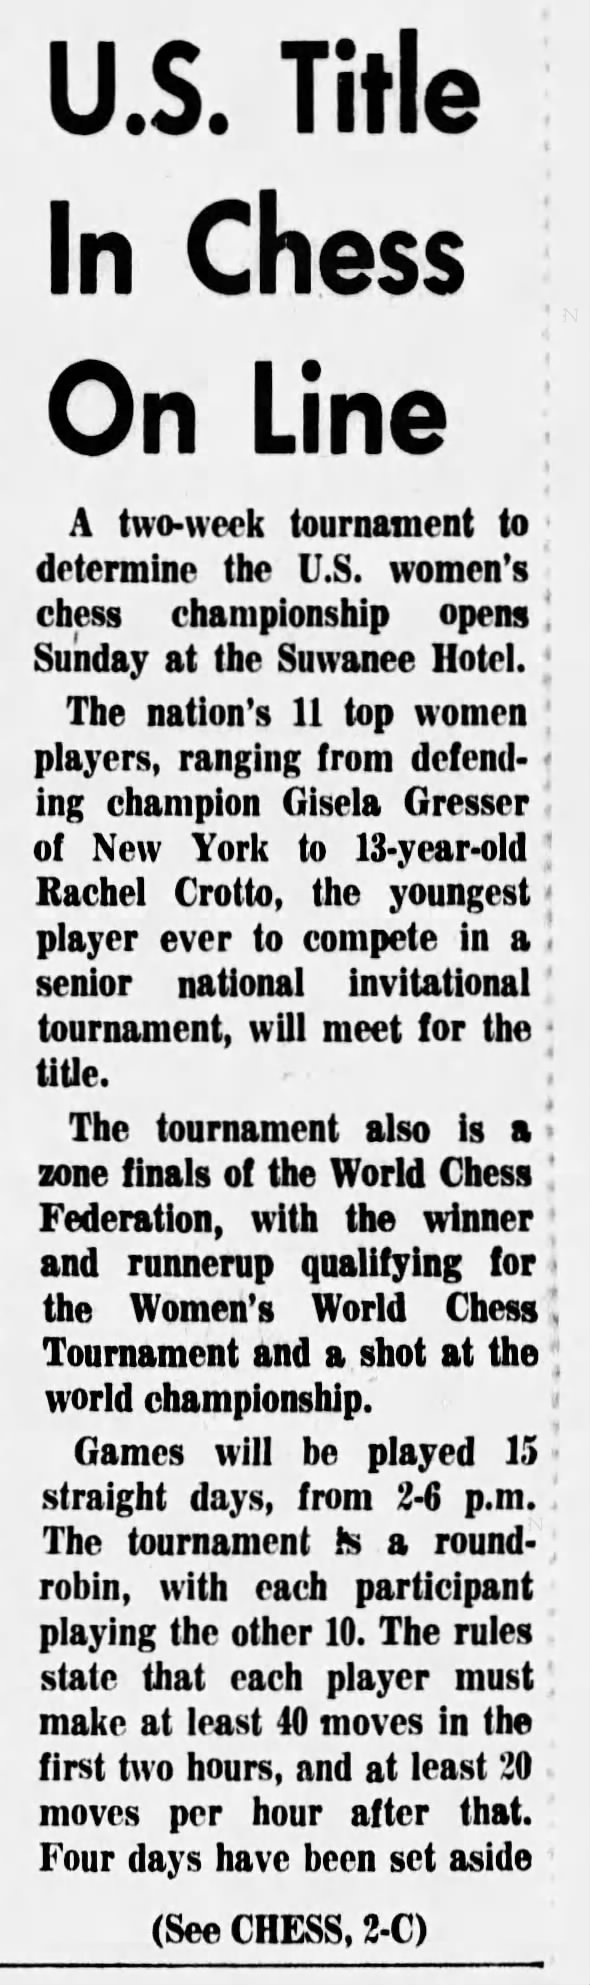 U.S. Title In Chess On Line